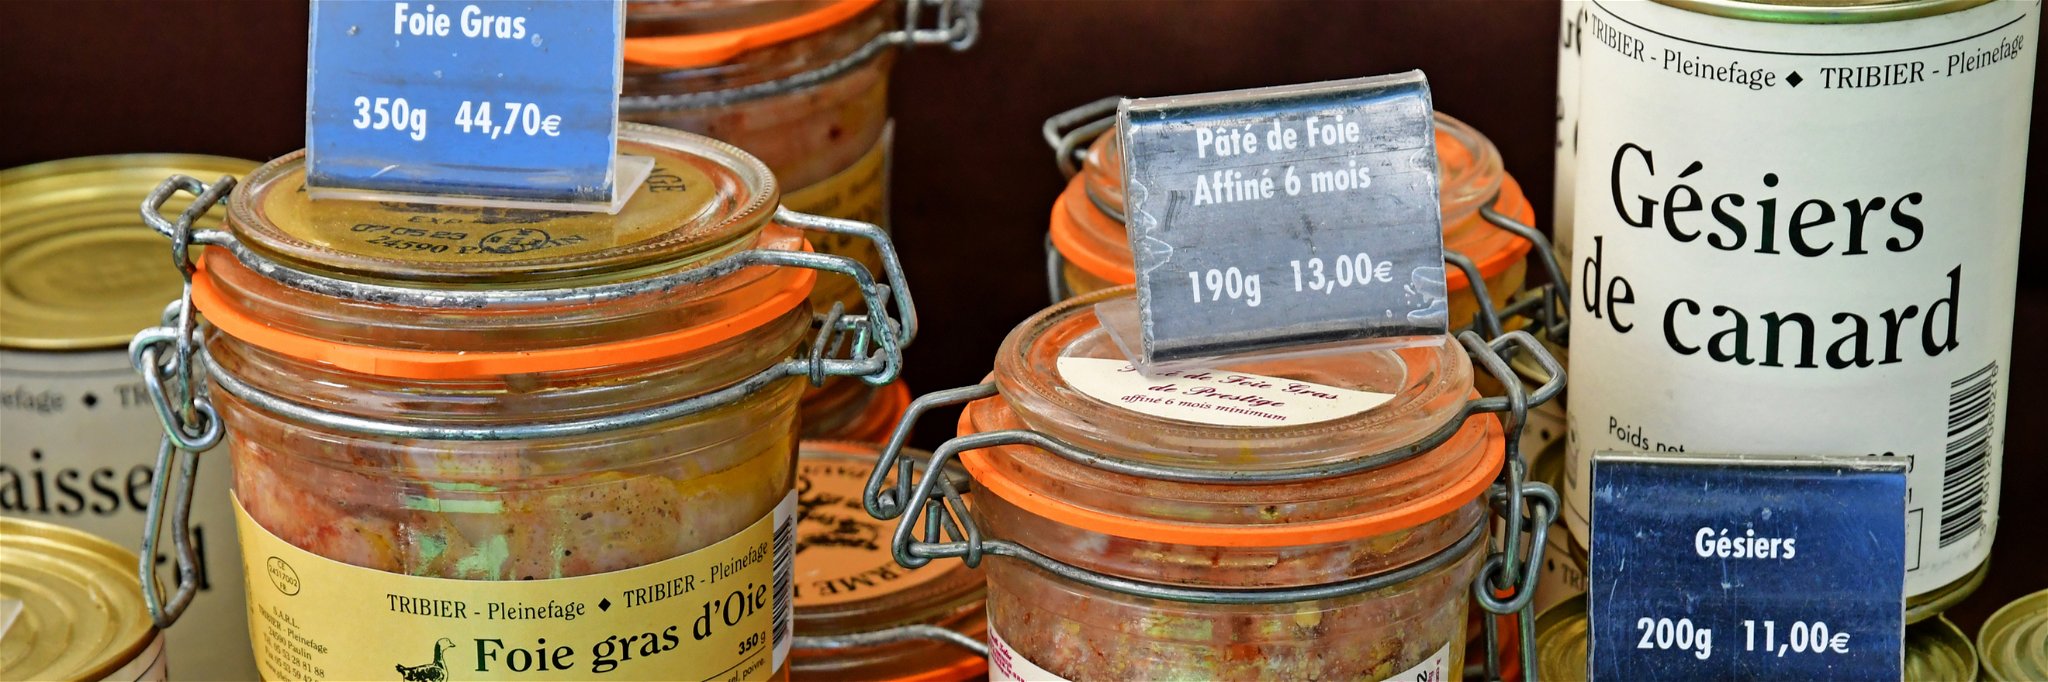 Foie gras for sale at a market in France.